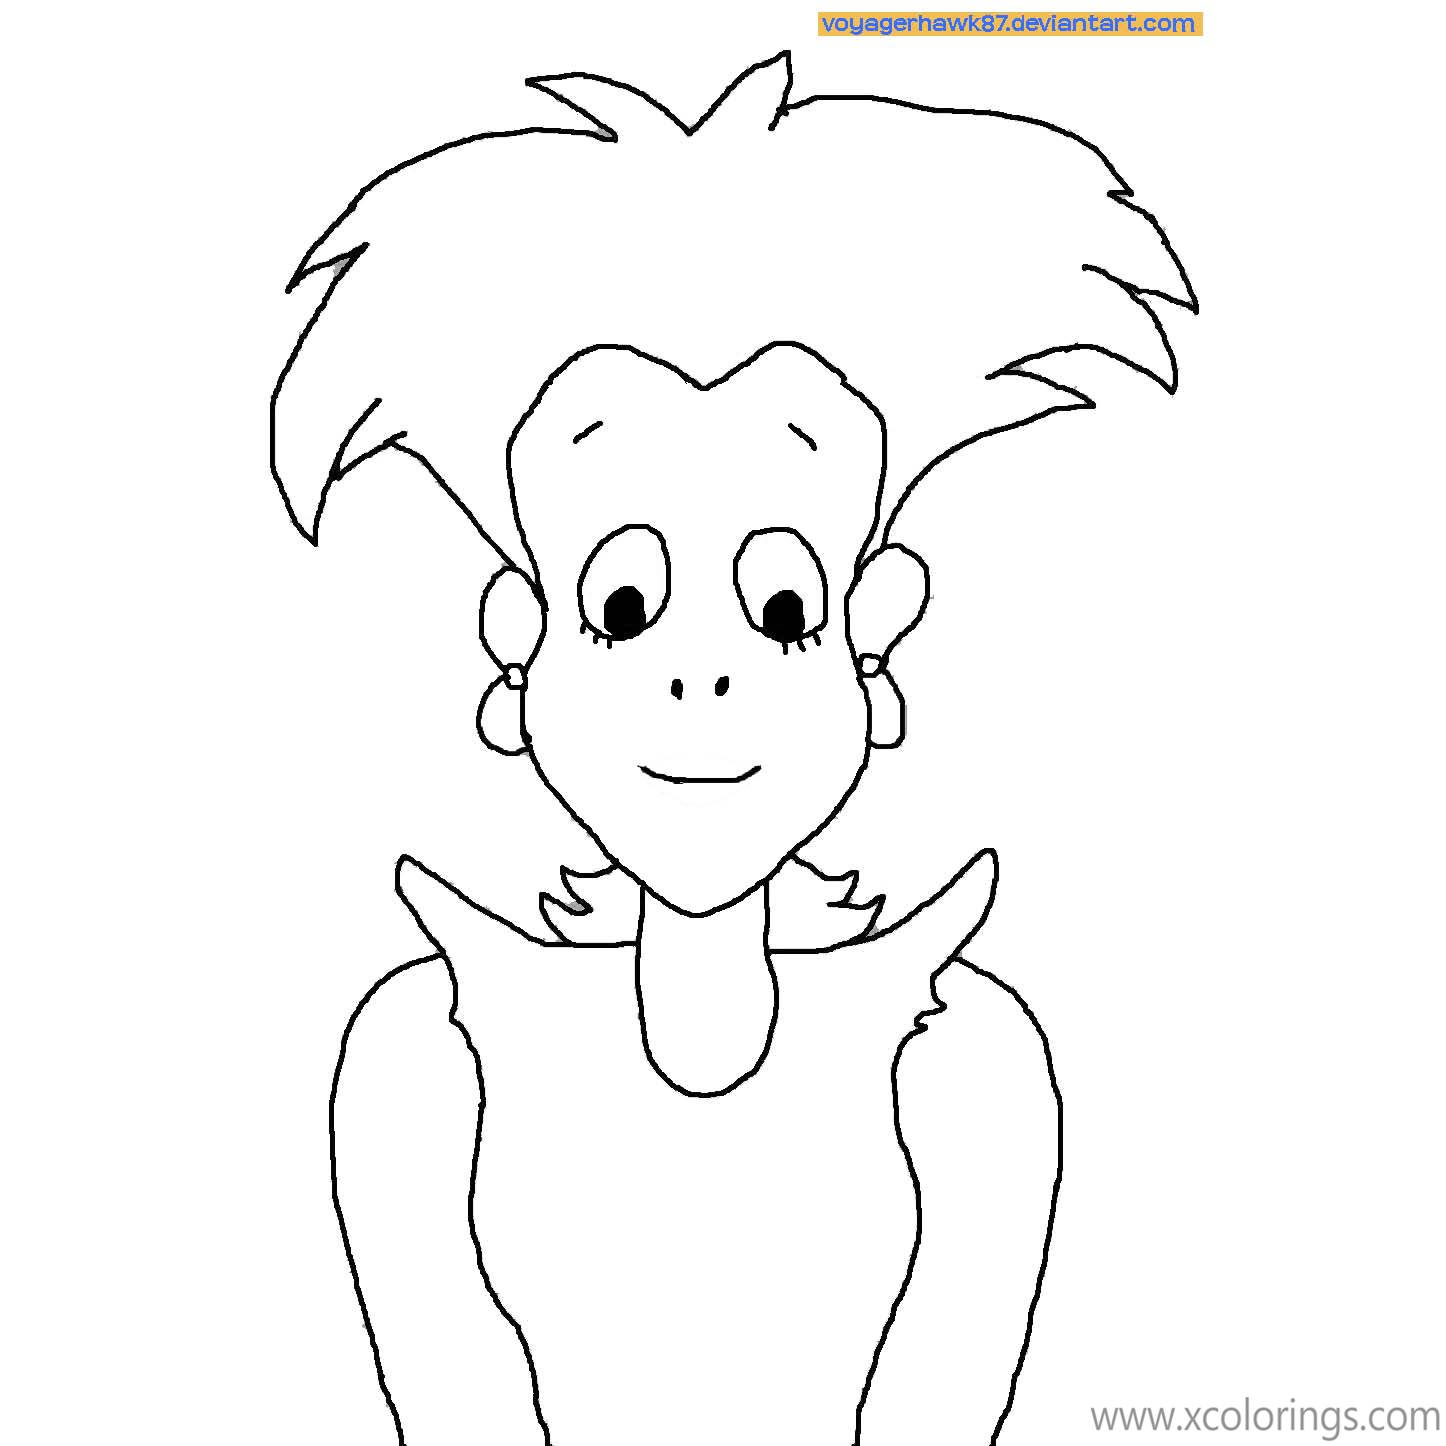 Bobbie Goods Coloring Pages Printable - Printable World Holiday